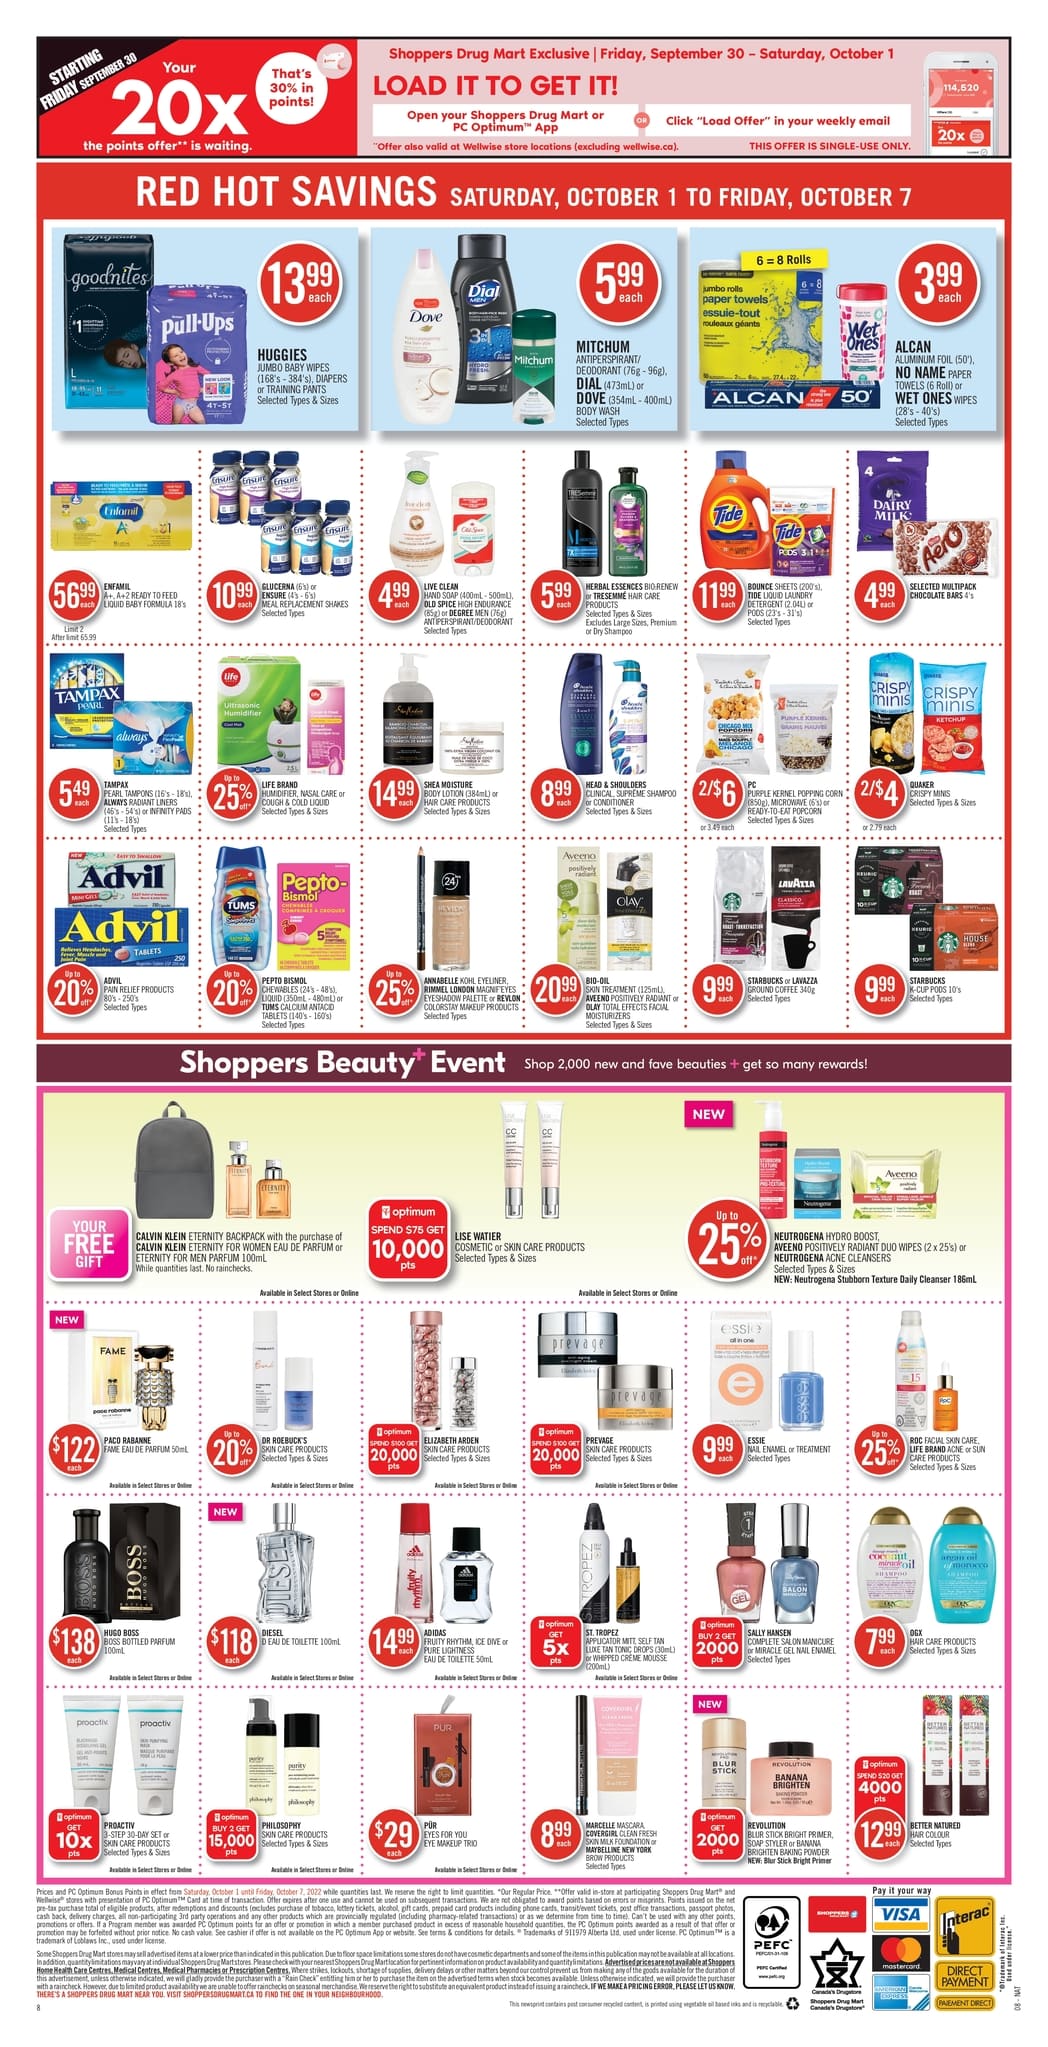 Shoppers Drug Mart - Weekly Flyer Specials - Page 17